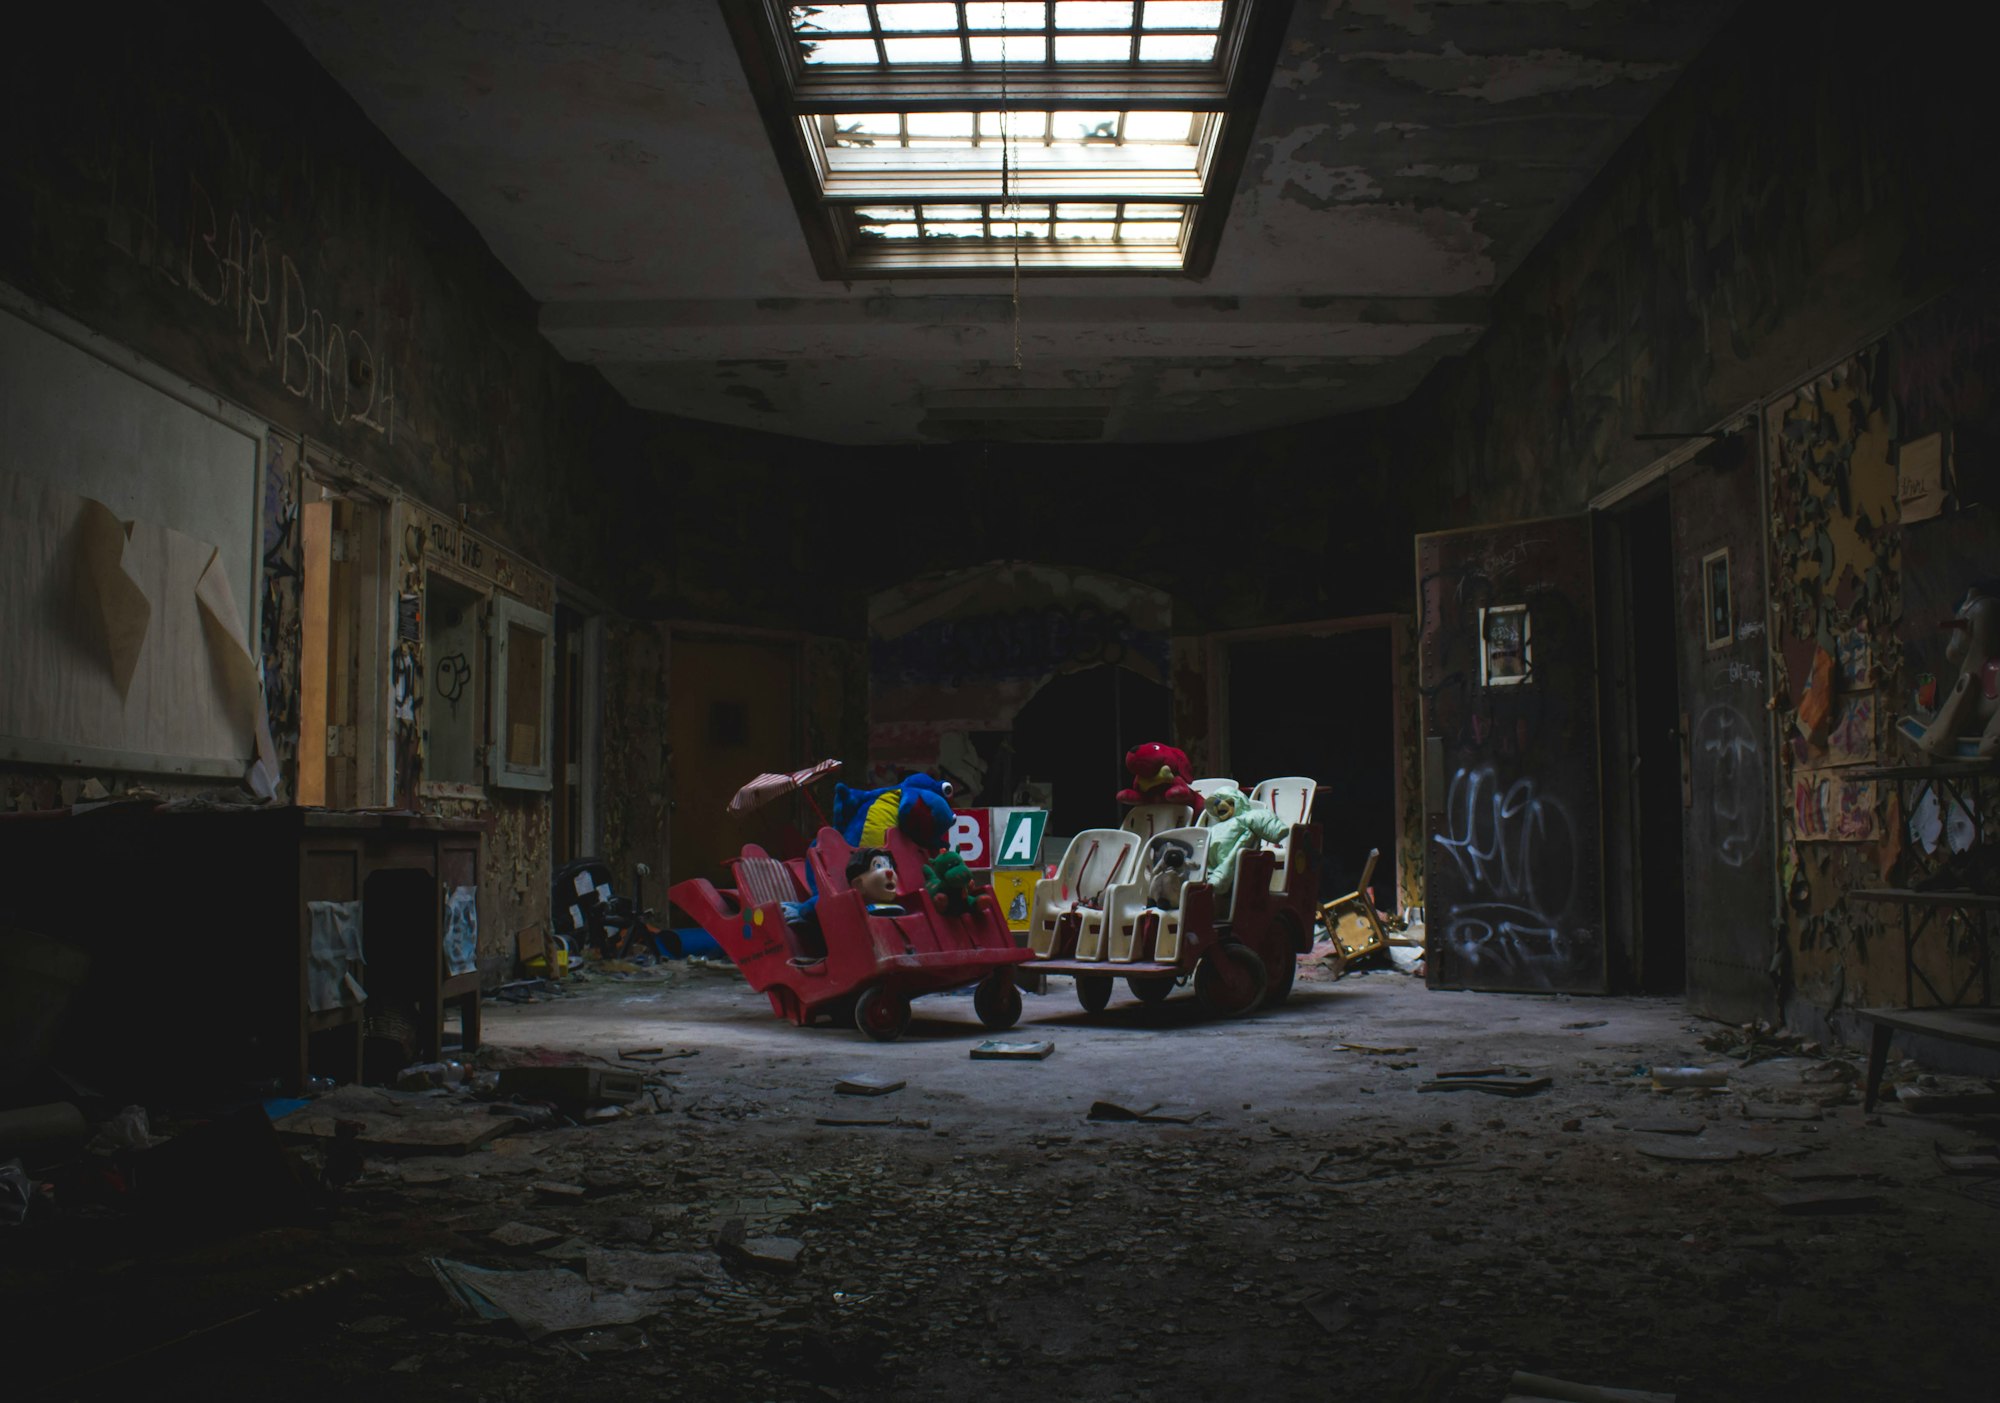 An abandoned asylum corridor with peeling walls and toys in the middle of the room.